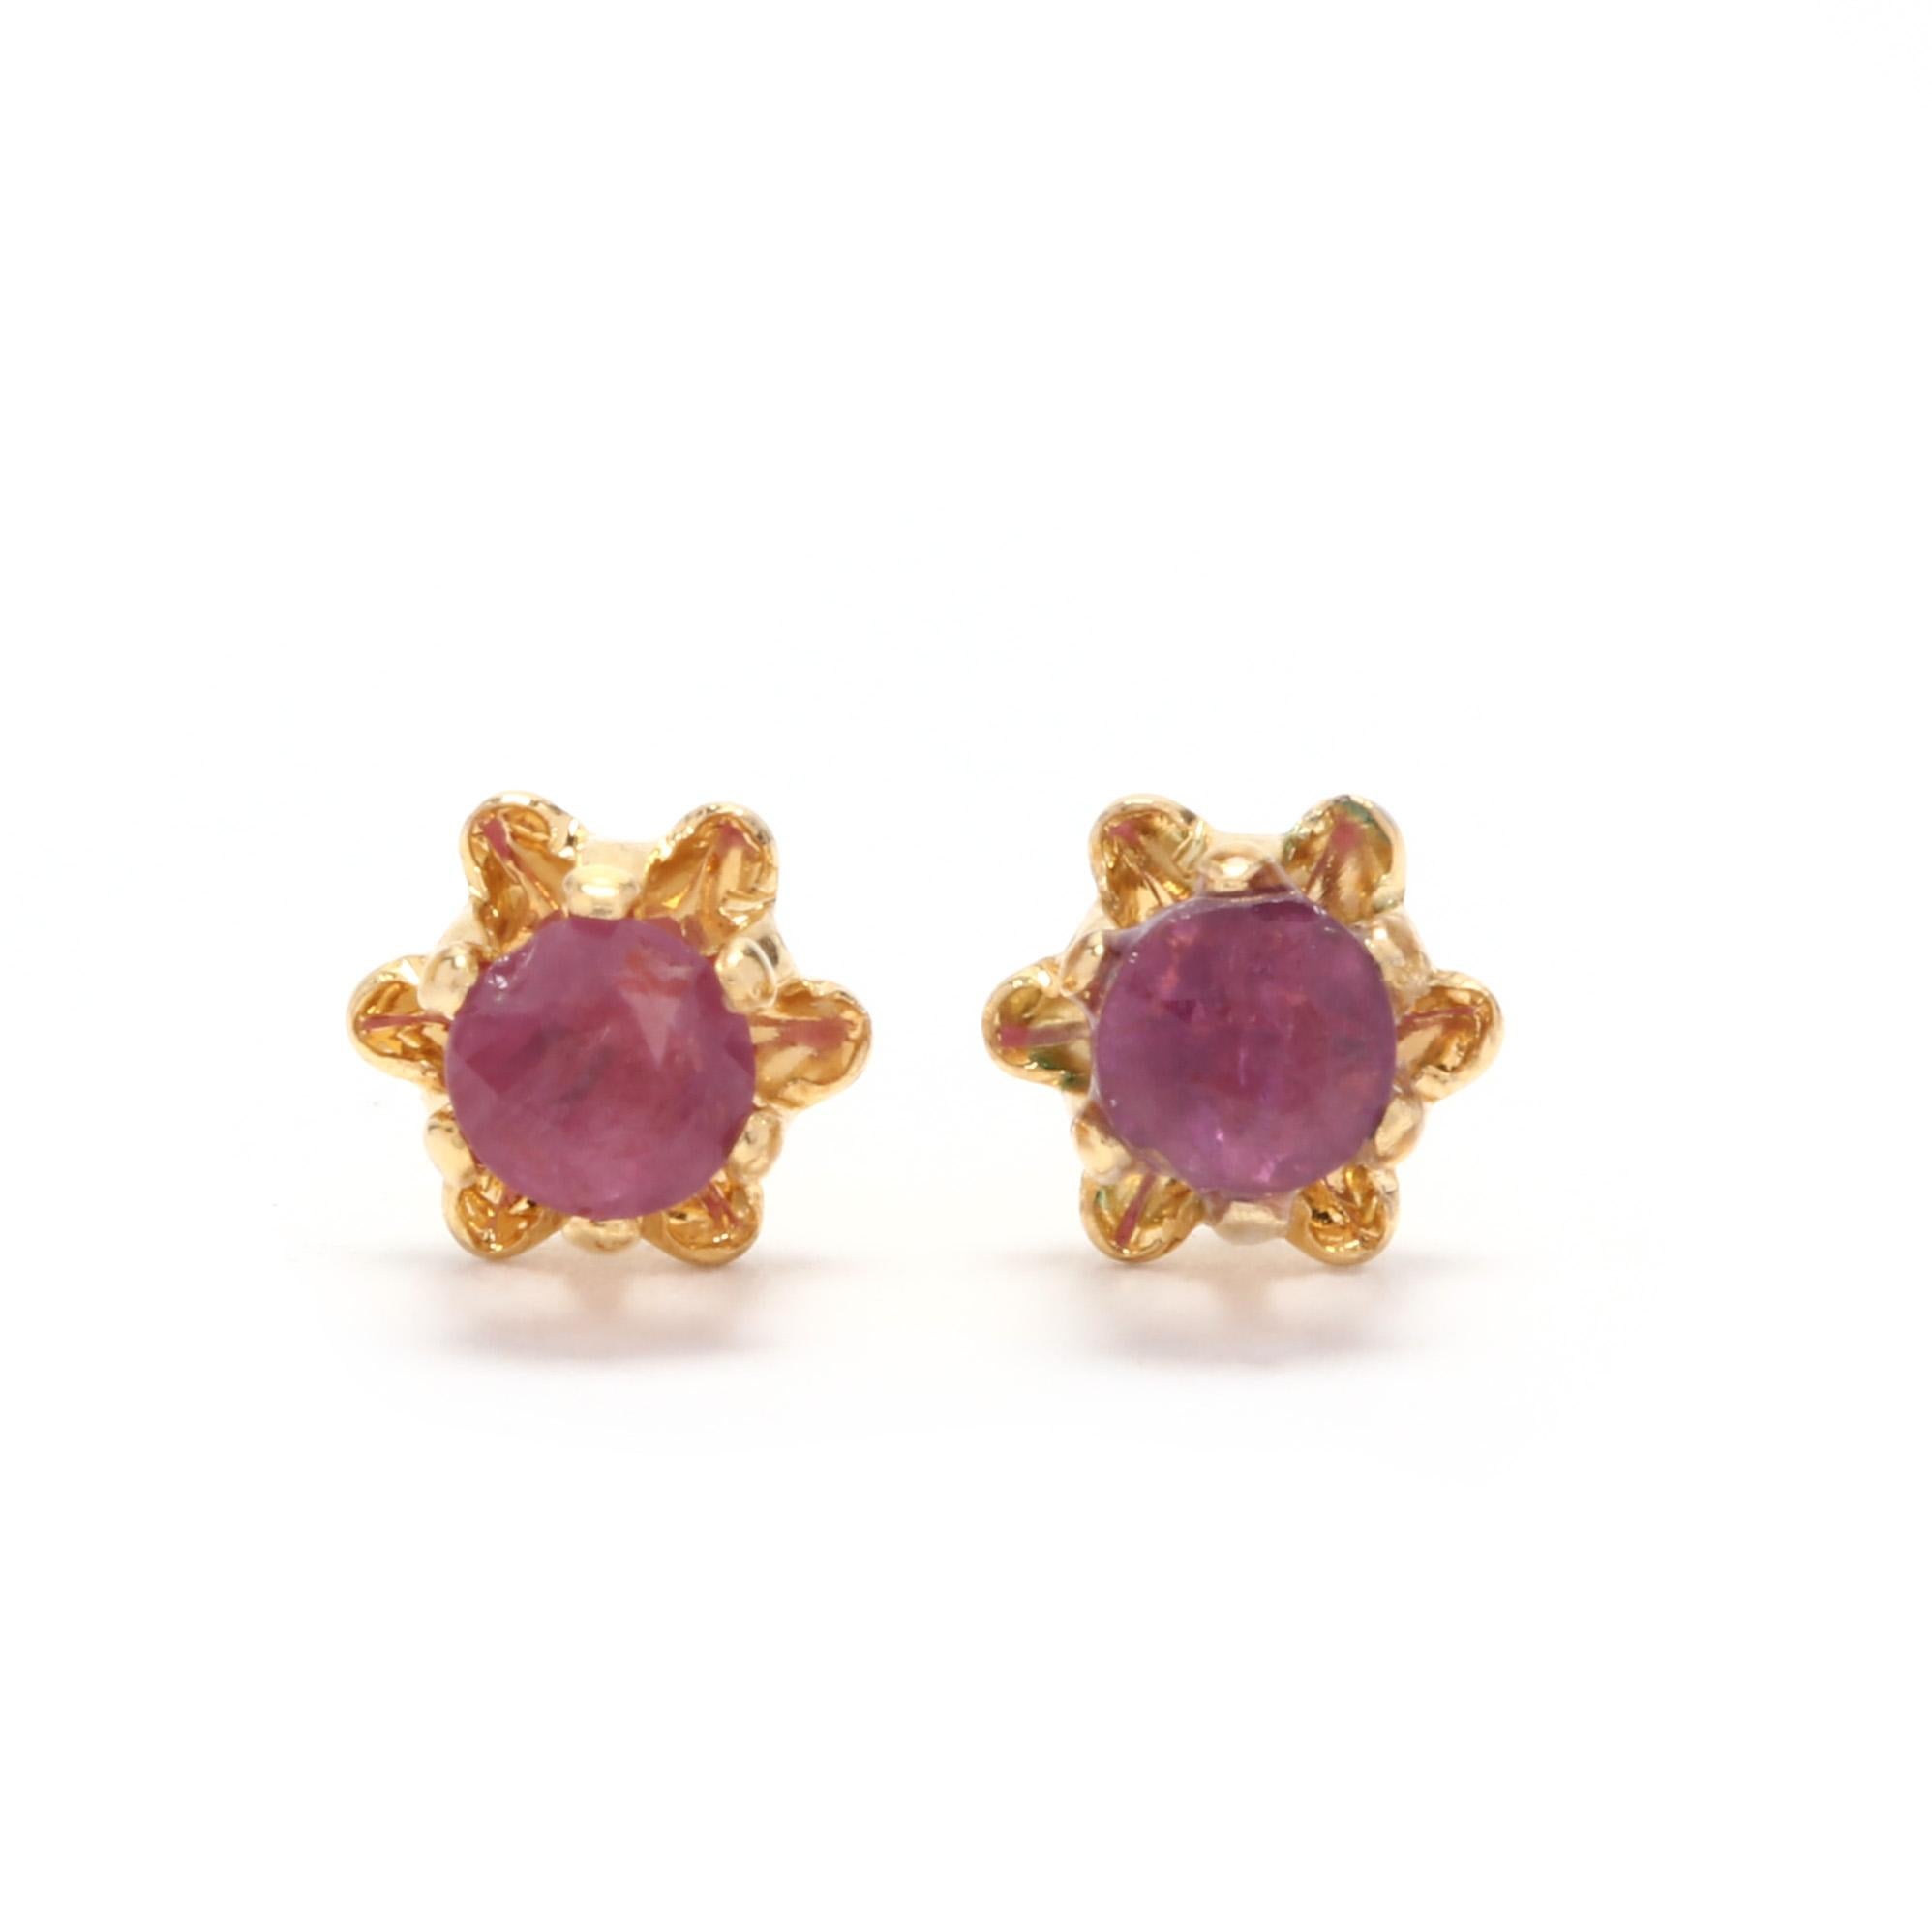 A pair of 14 karat yellow gold and ruby flower stud earrings. These earrings feature prong set, round cut rubies set in a tulip mounting and with push backs.

Stones:
- rubies
- round cut, 2 stones
- 3.25 mm
- approximately .40 total carats

.29